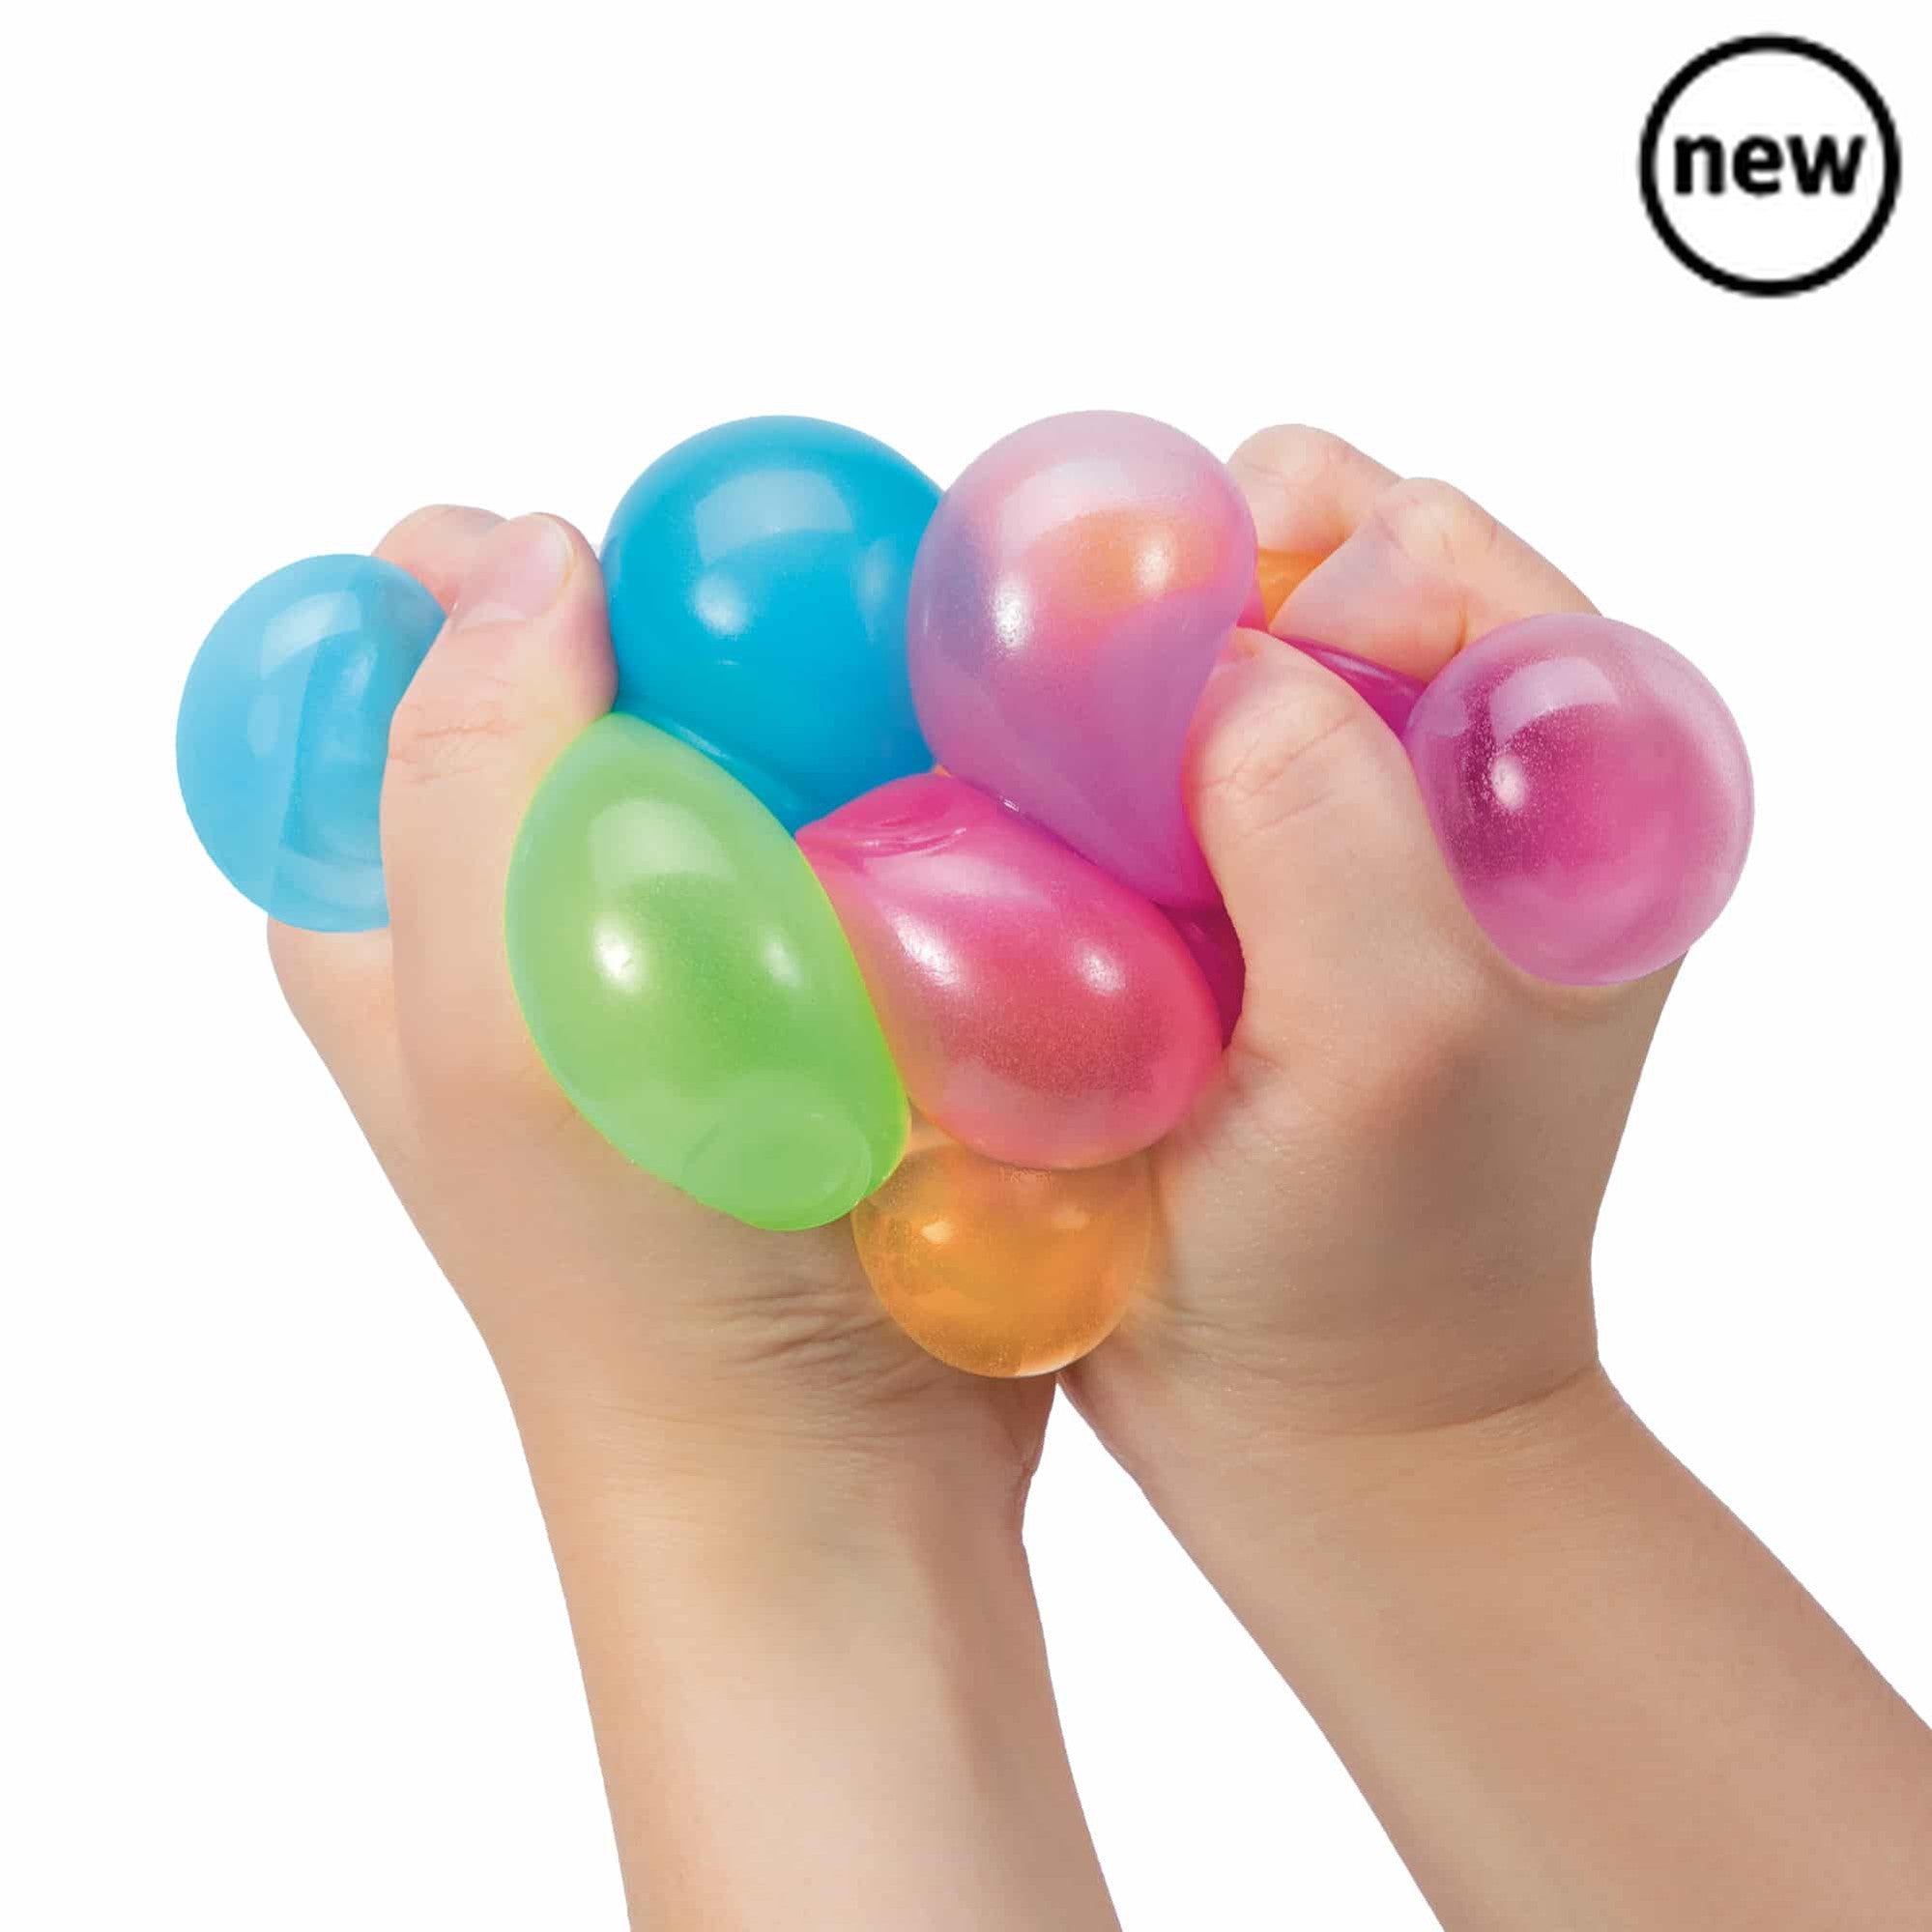 Stickums Needoh, Nee Doh Stickums have a sticky outer skin and a cushy air-filled centre, perfect for squishing, squeezing and smushing!Coming in a compact pack of 12, your sticky-wicky, wally-crawly, glow-in-the-dark globs will cling together, or stick to the windows and walls! They're lightweight, and perfect for sticky rolling or squeezing sensory play. If they lose their stick, simply wash them with warm soap and water! What a wonderful low impact play activity for curious minds, offering a sense of cal